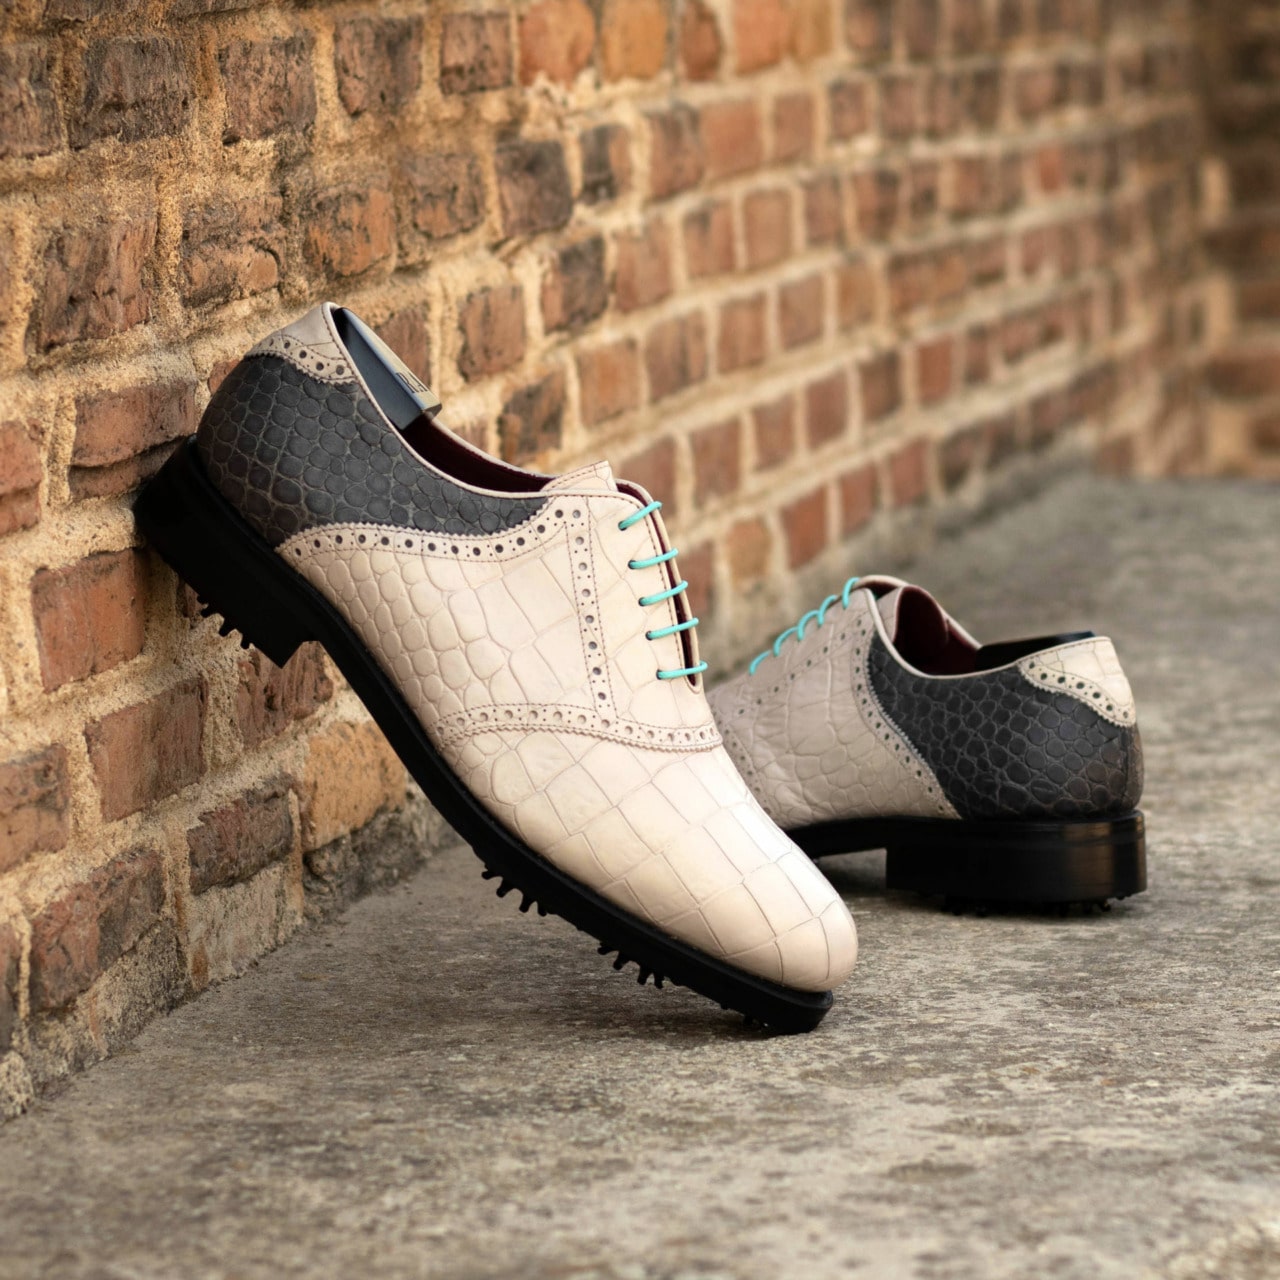 Introducing the Lincoln Ave Saddle Golf Shoe: A Fusion of Elegance and Performance from Robert August